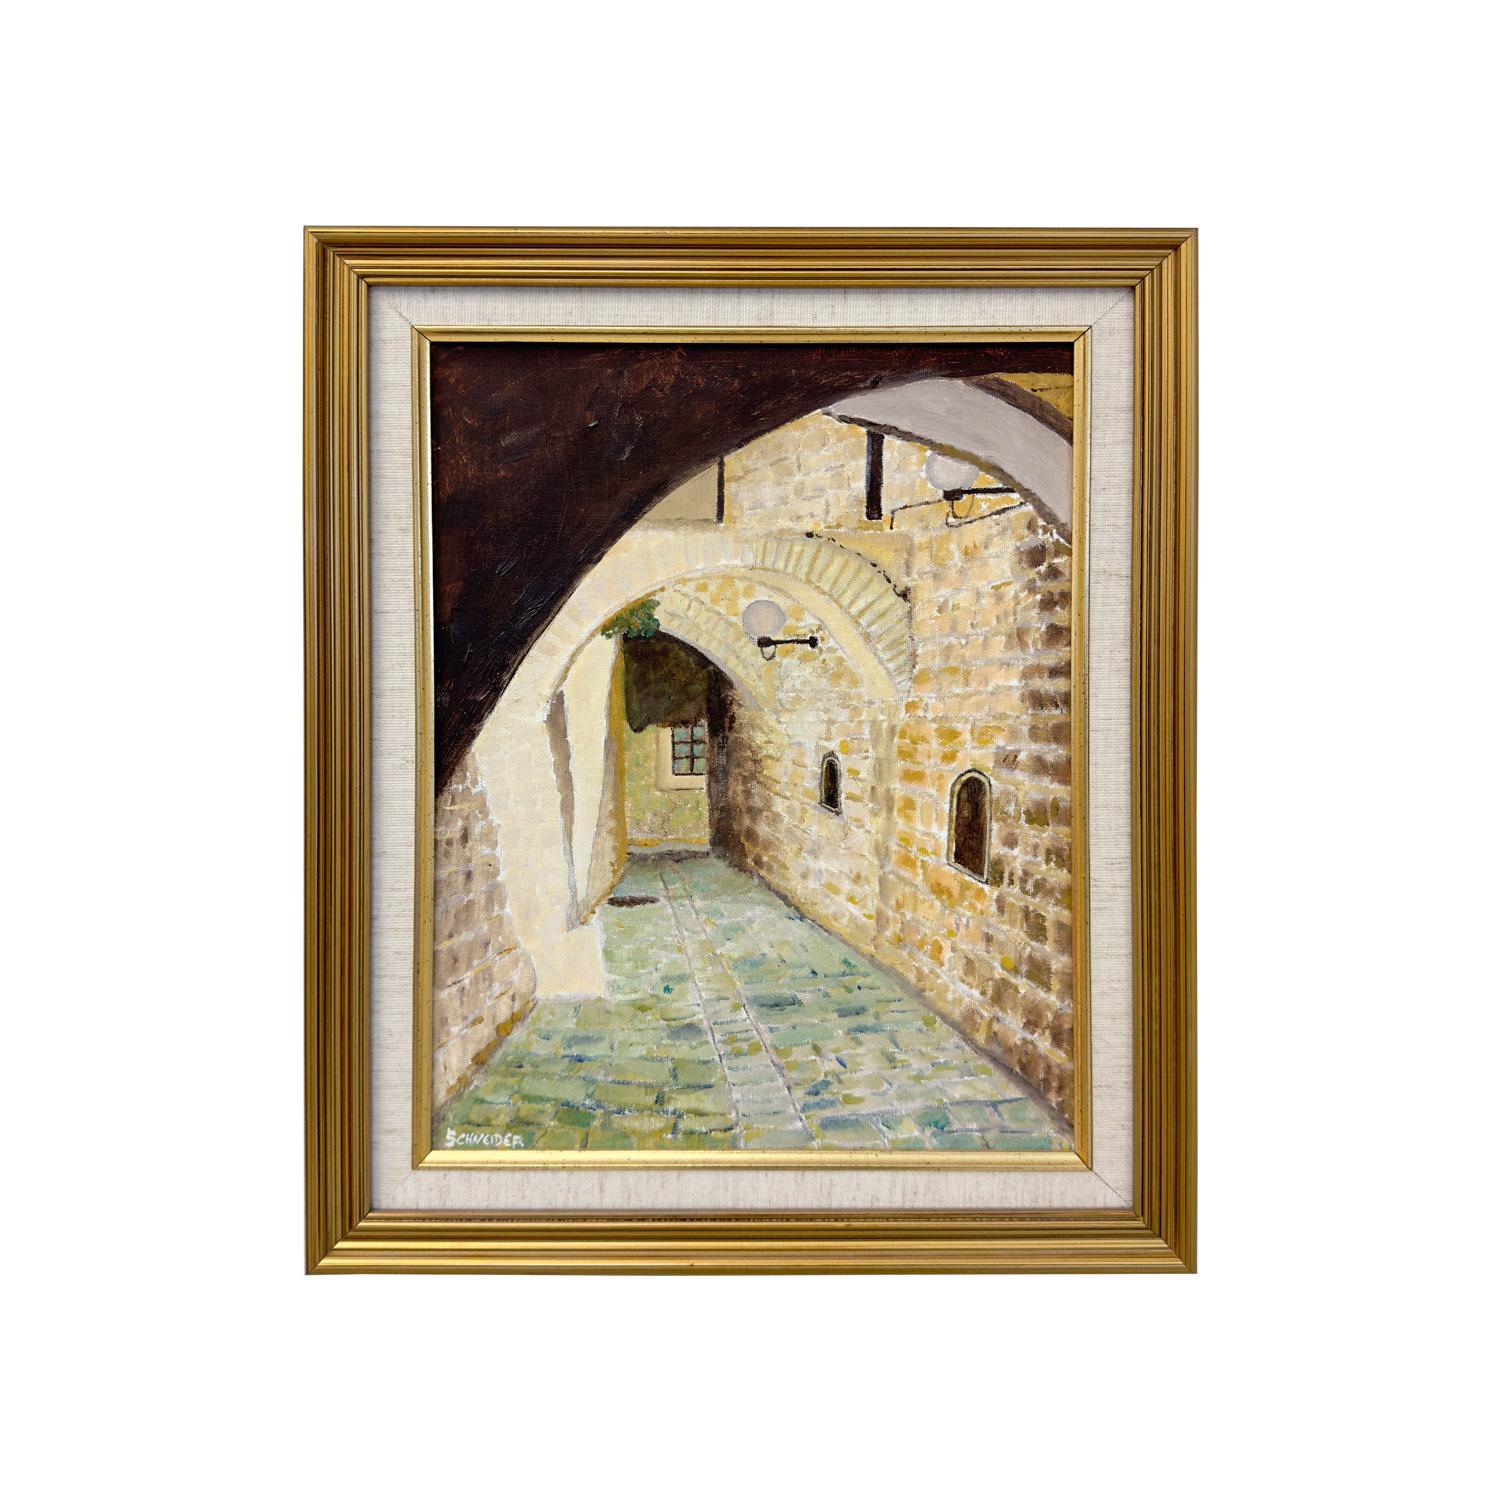 A captivating oil on canvas painting, titled 'Street of Jerusalem". The artist M. Schneider skillfully captures the essence of this revered city. 
The palette of pale green hues breathes life into the cobblestone pathway, evoking a sense of